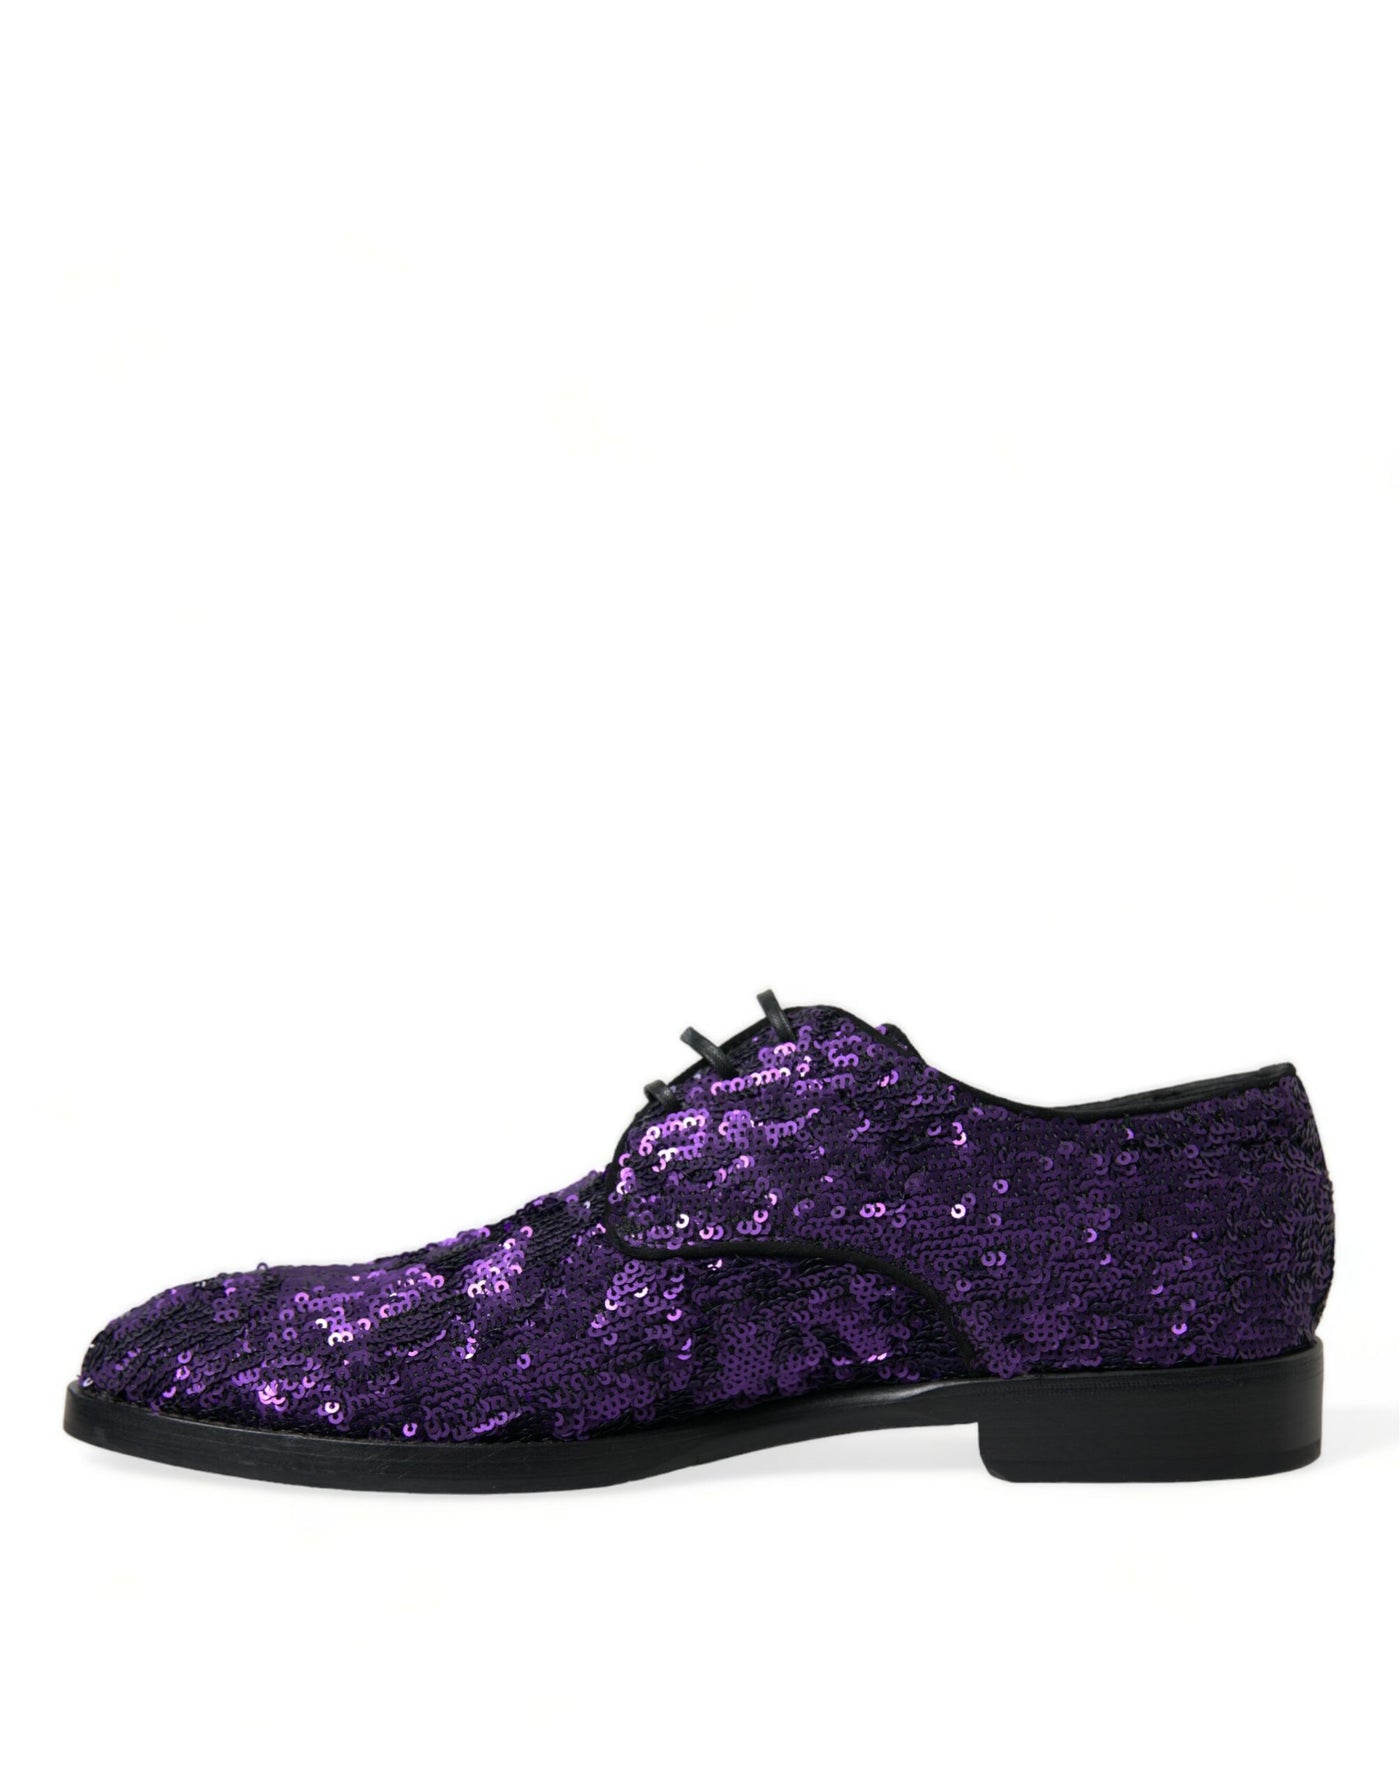 Dolce & Gabbana Purple Sequined Lace Up Oxford Dress Shoes